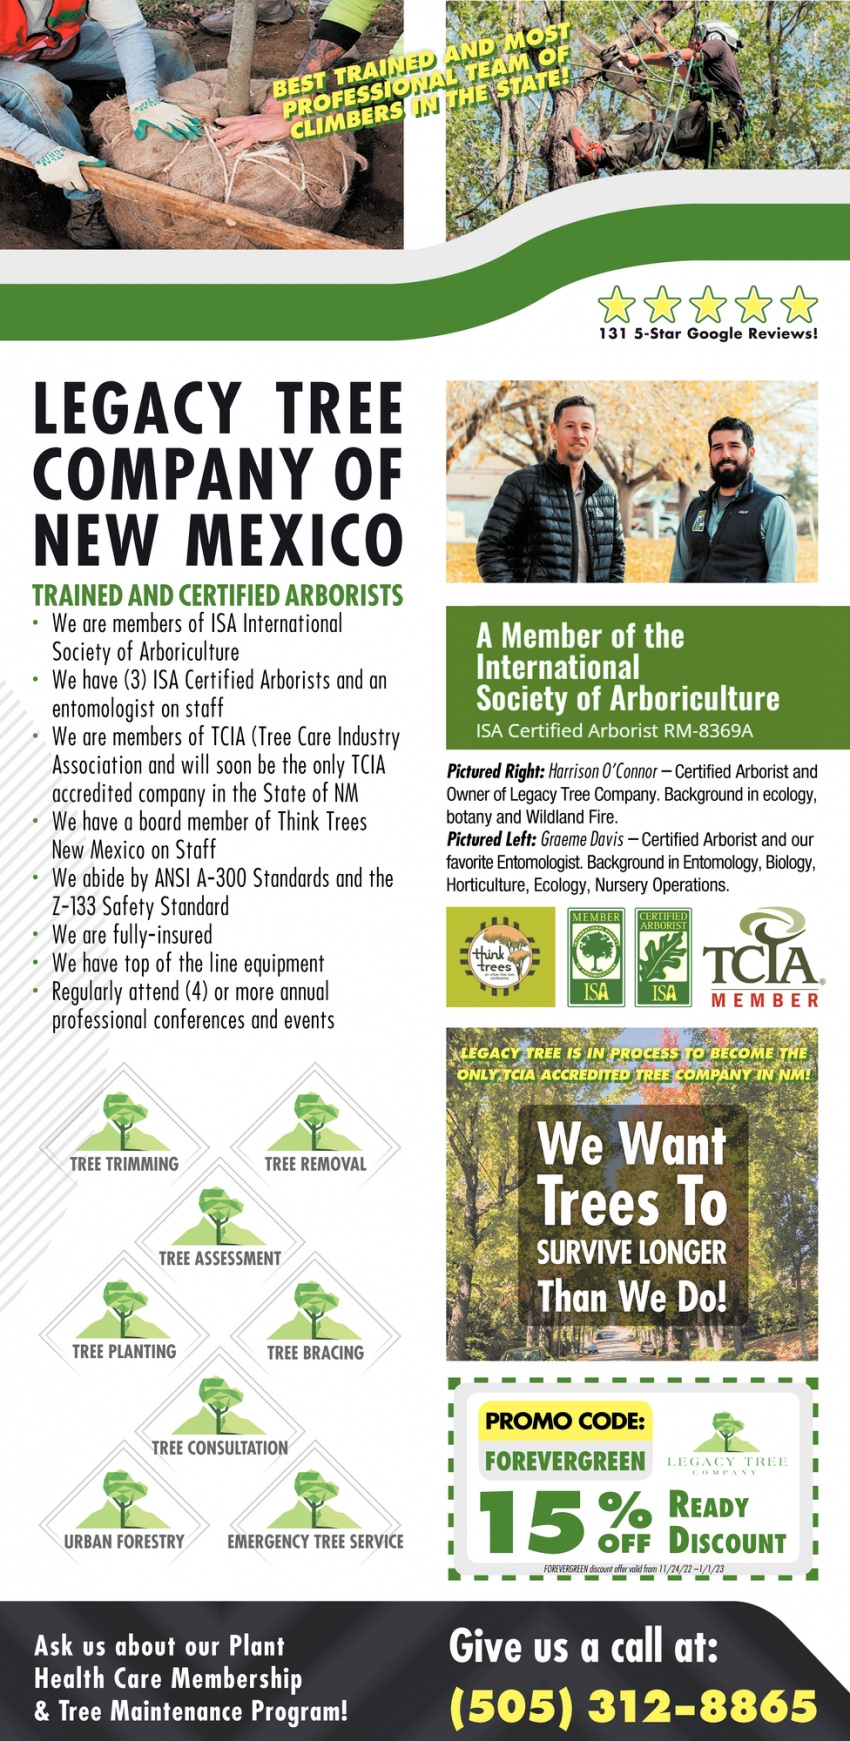 A Member Of The International Society Of Arboriculture